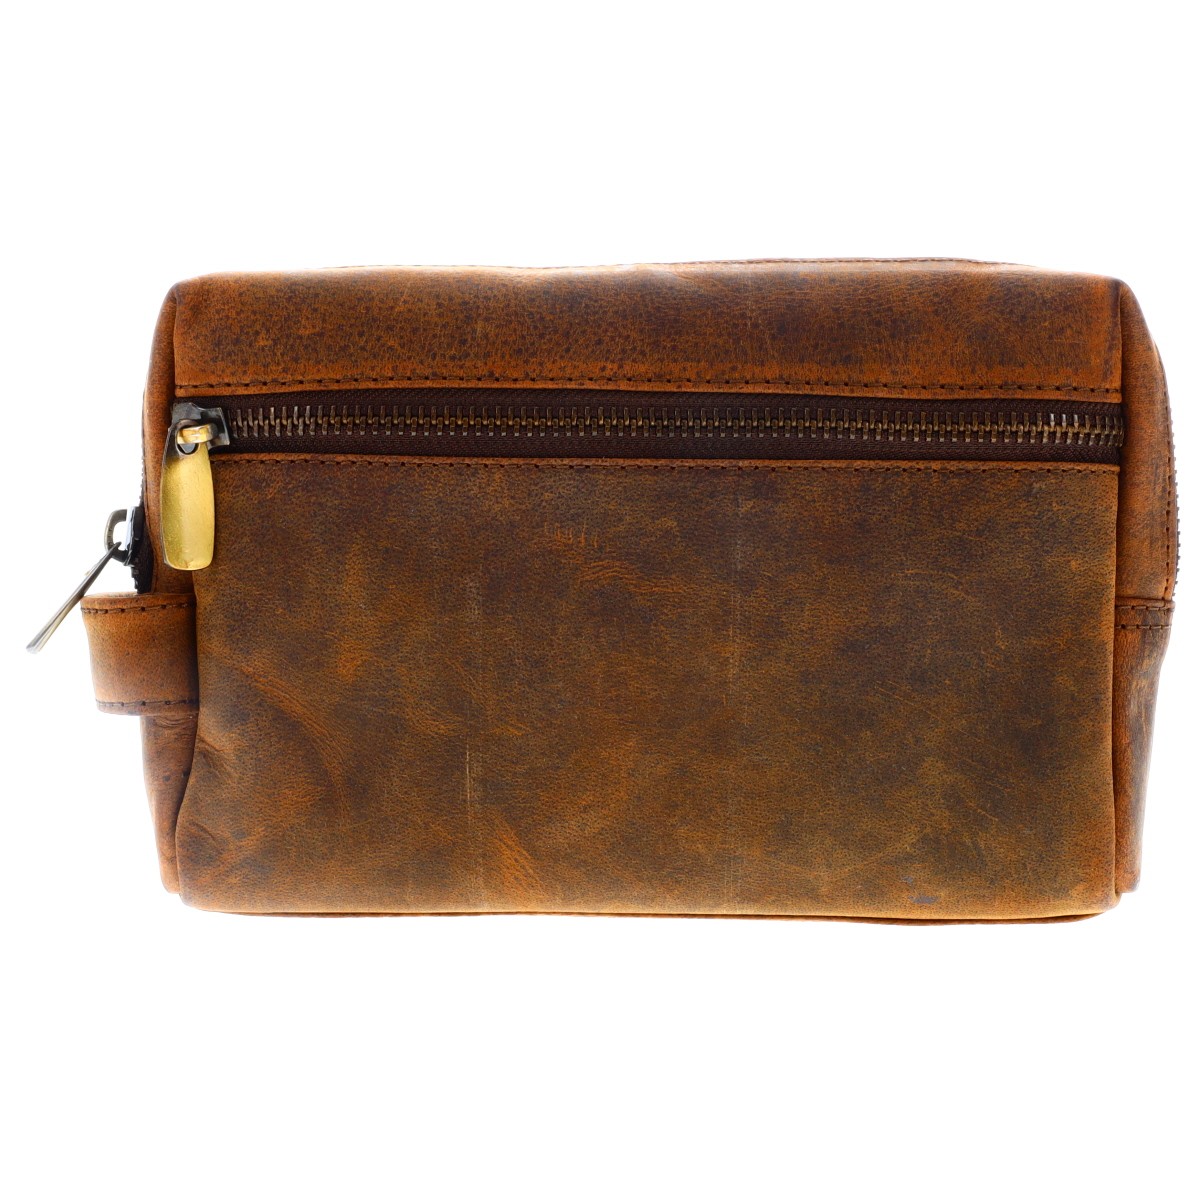 Distressed Leather Toiletry Bag